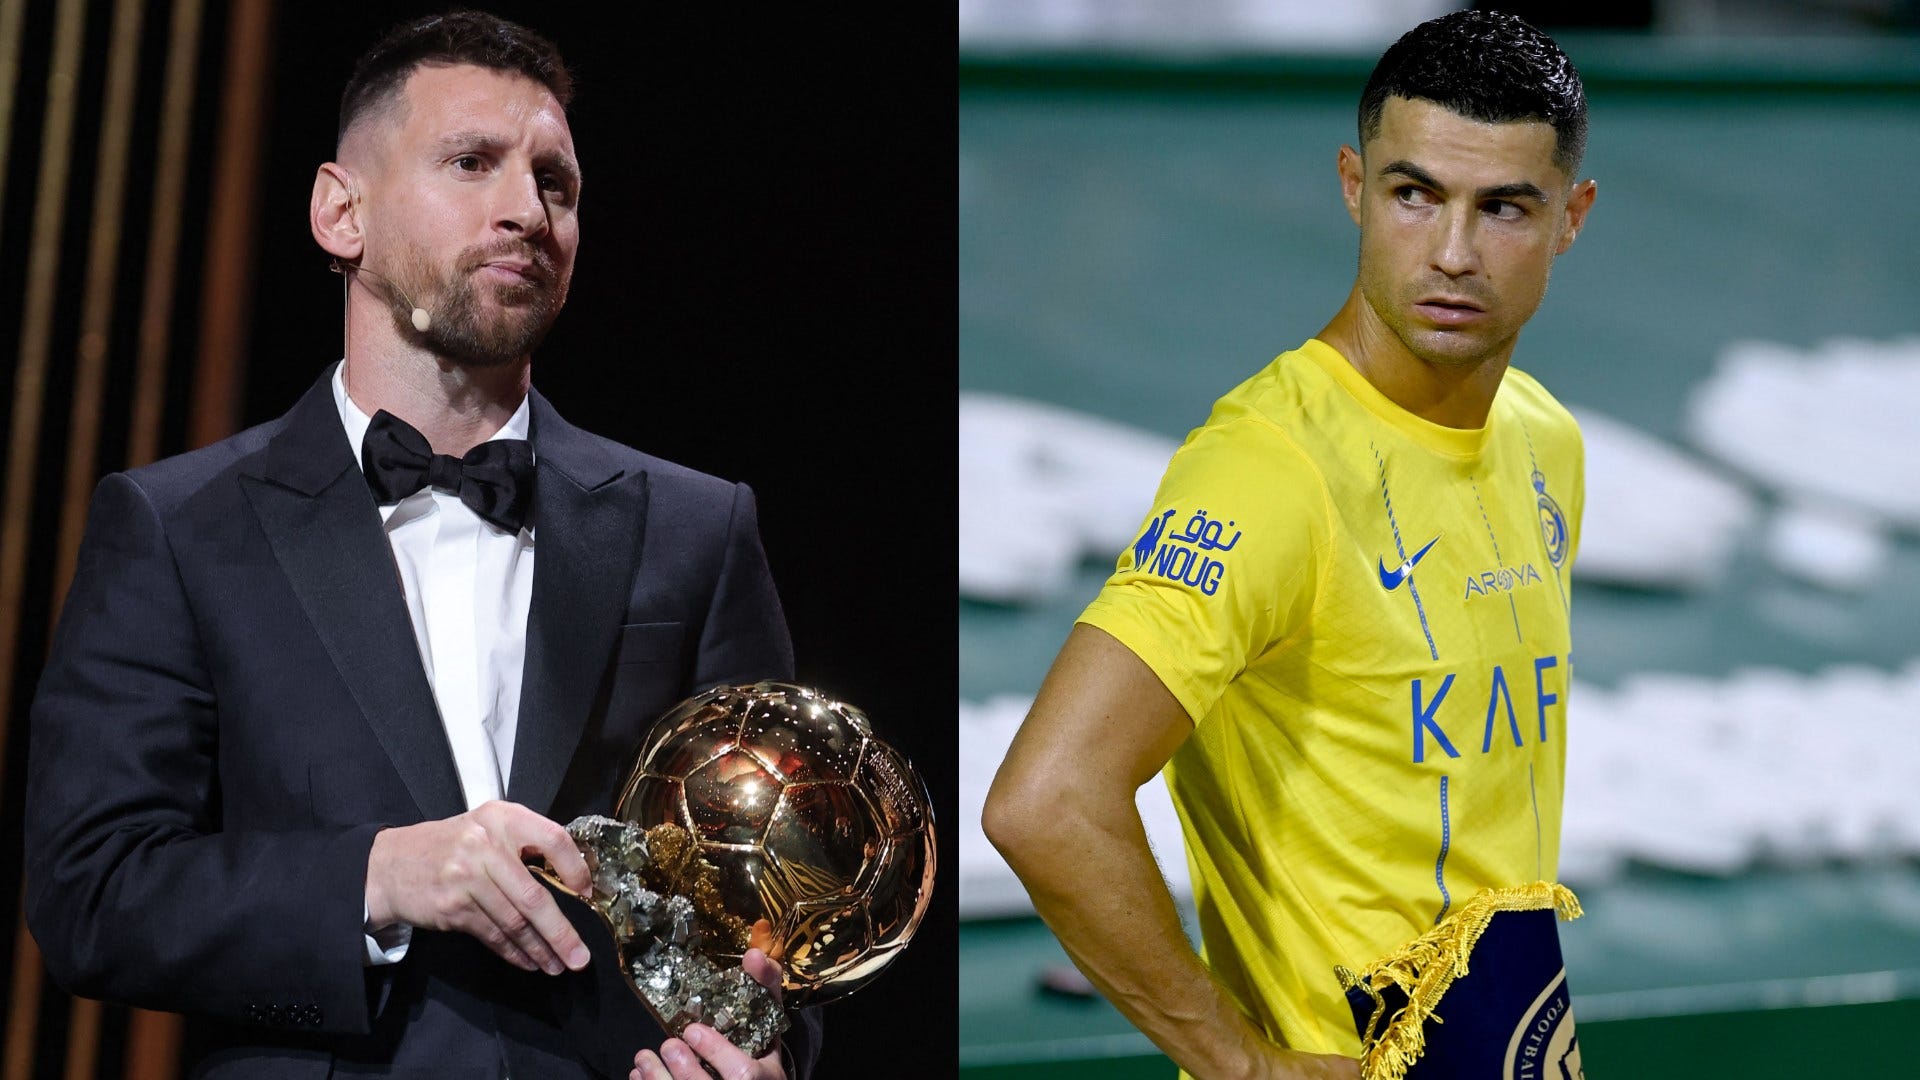 Forget football, Messi & Ronaldo battle it out over Instagram